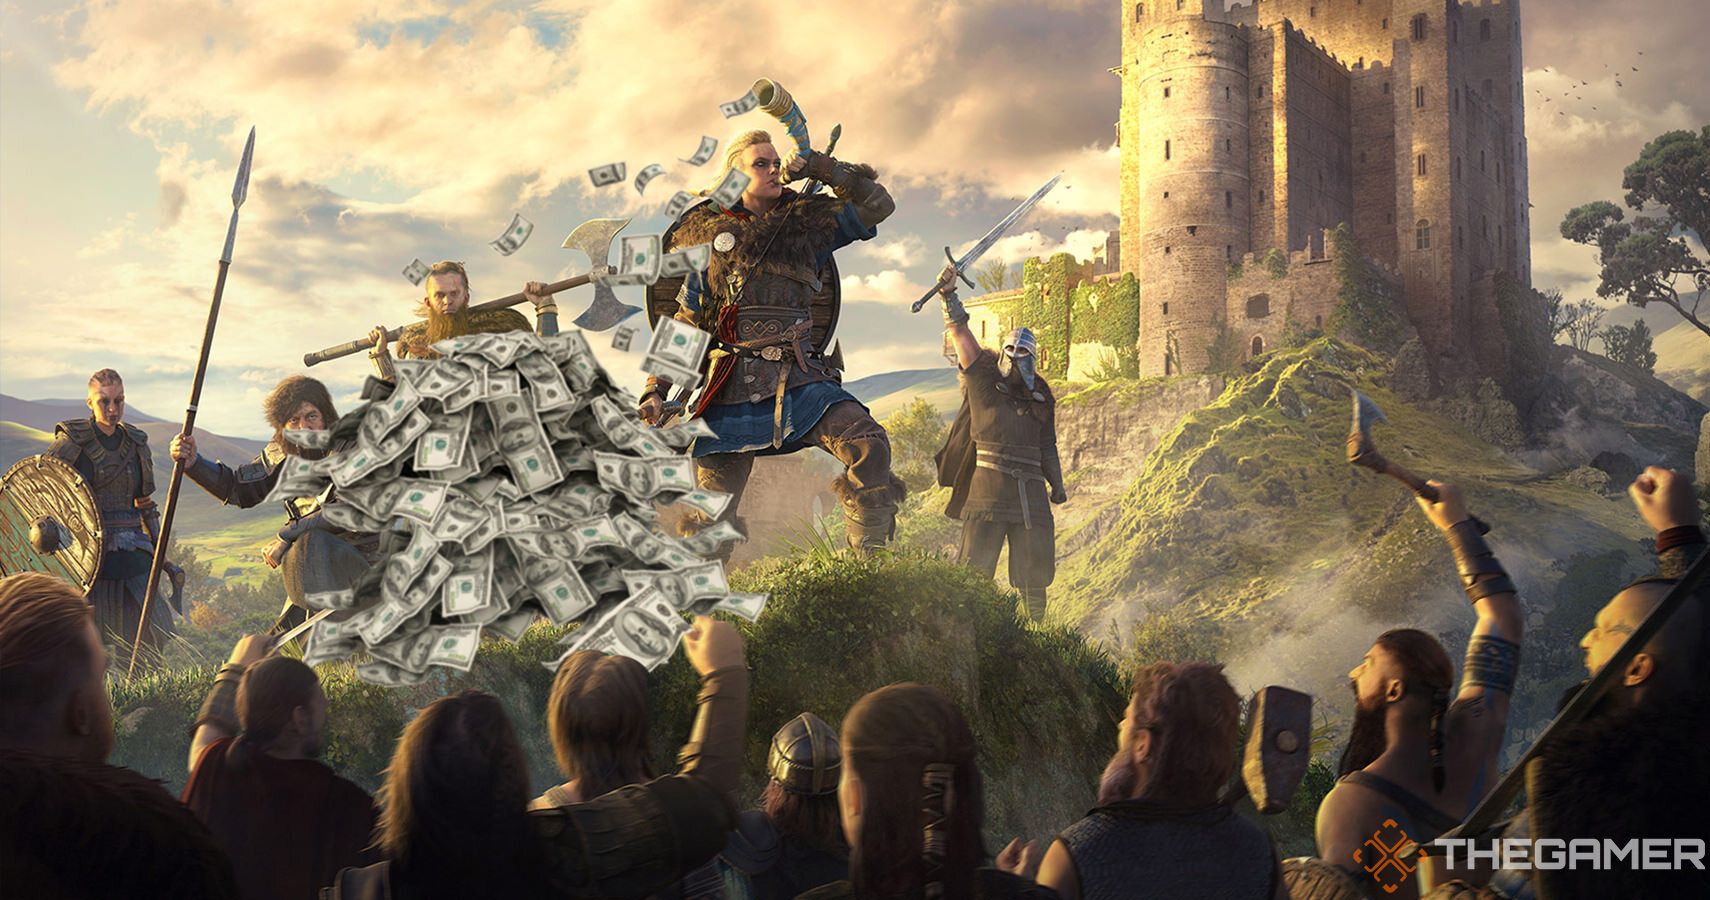 Fans Criticize Assassin's Creed Valhalla's Microtransactions